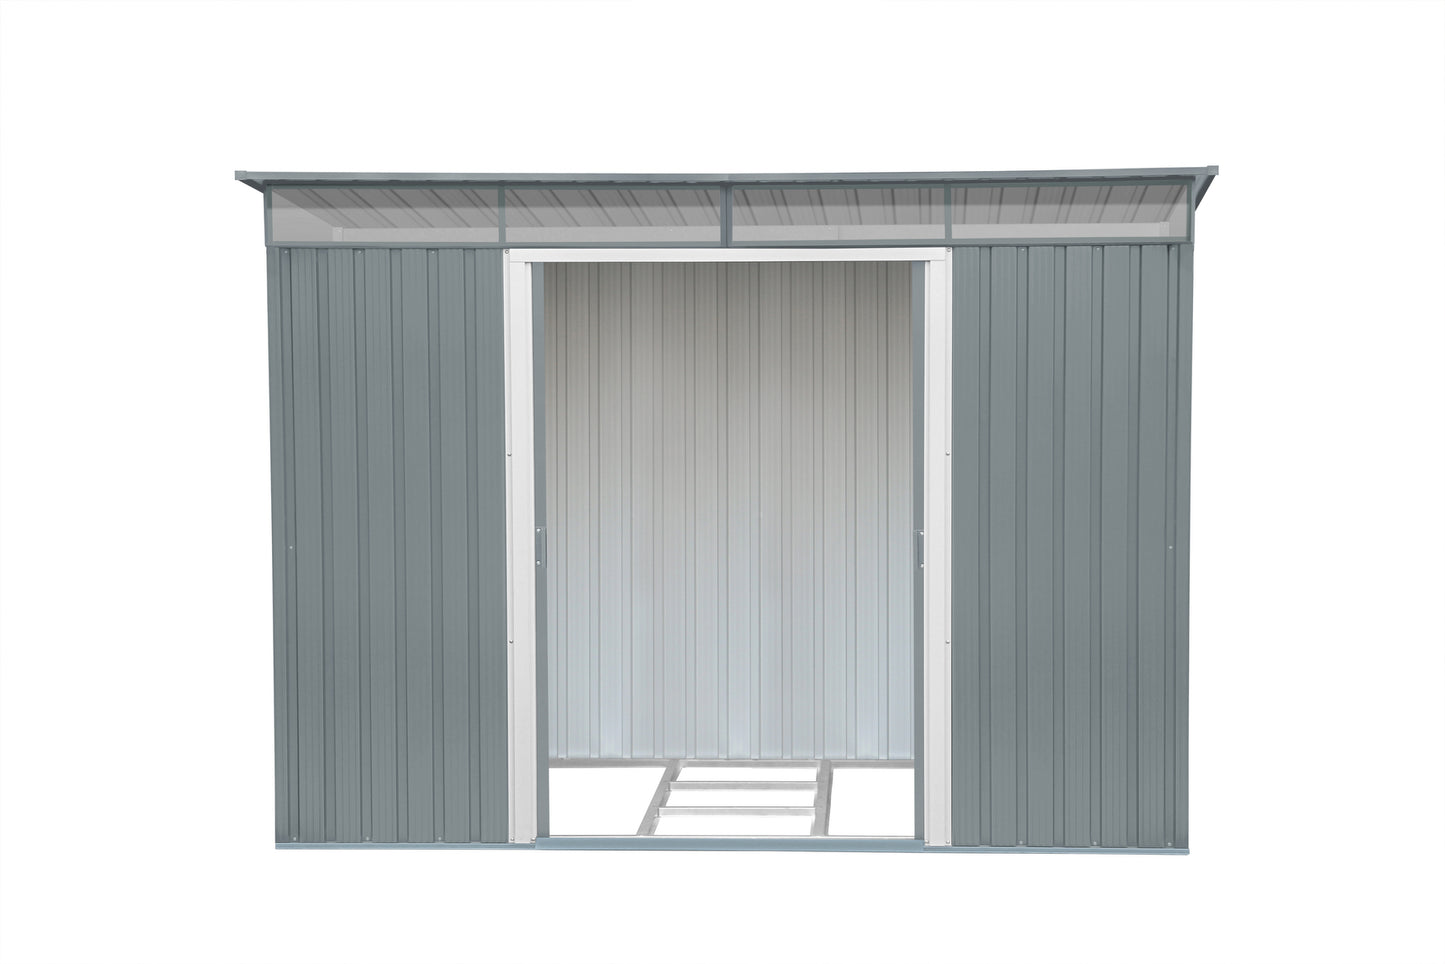 Duramax 8x6 Metal Shed Pent Roof with Skylight